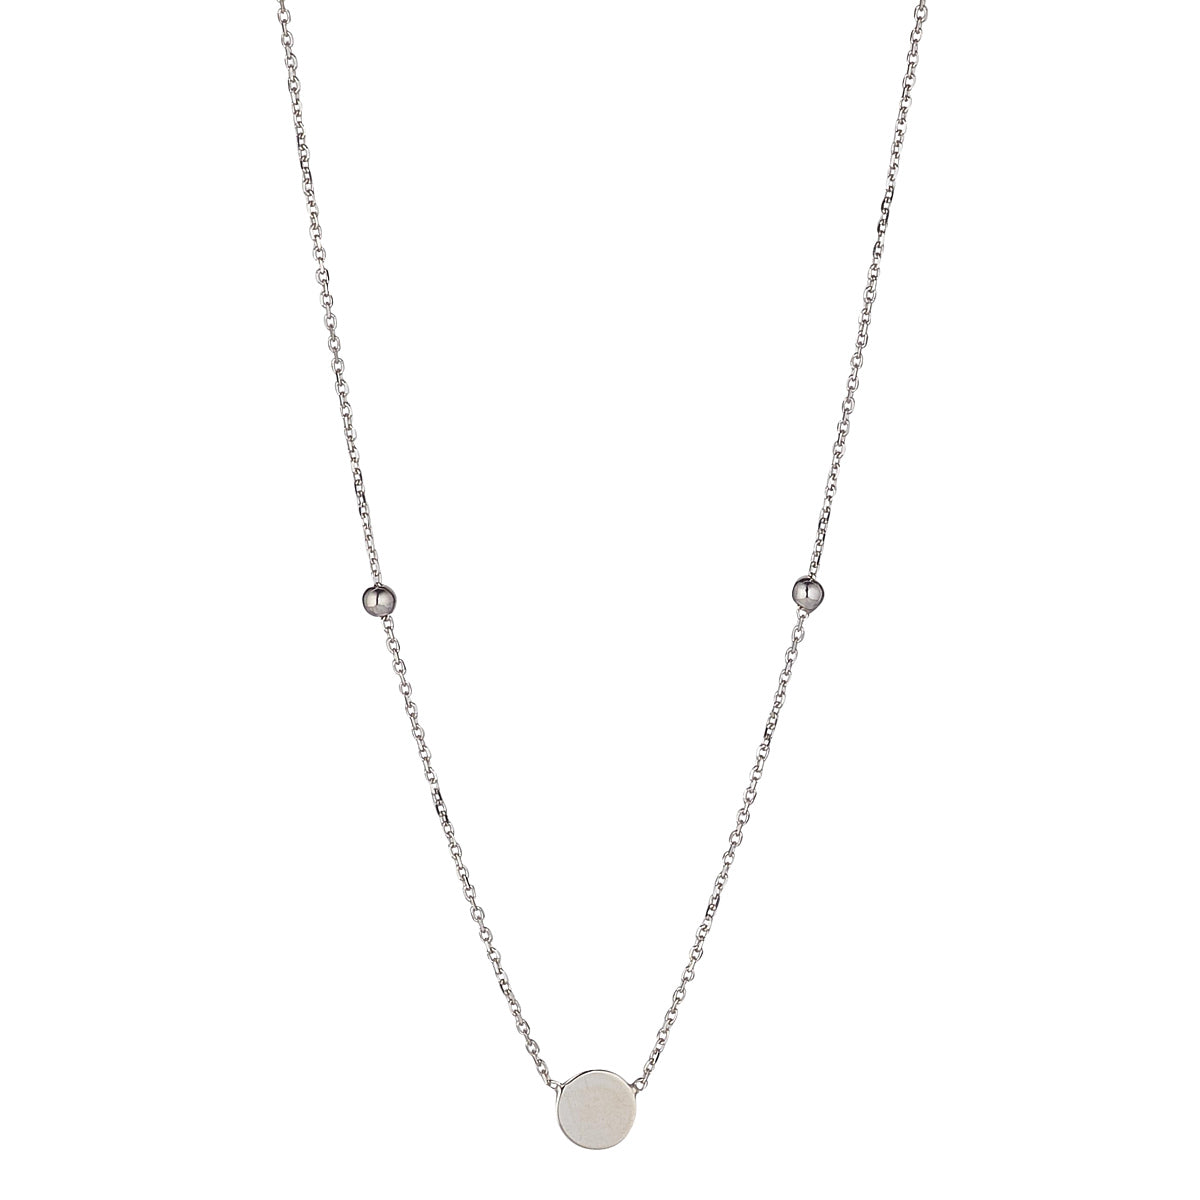 9ct White Gold Disc & Bead Necklace - John Ross Jewellers